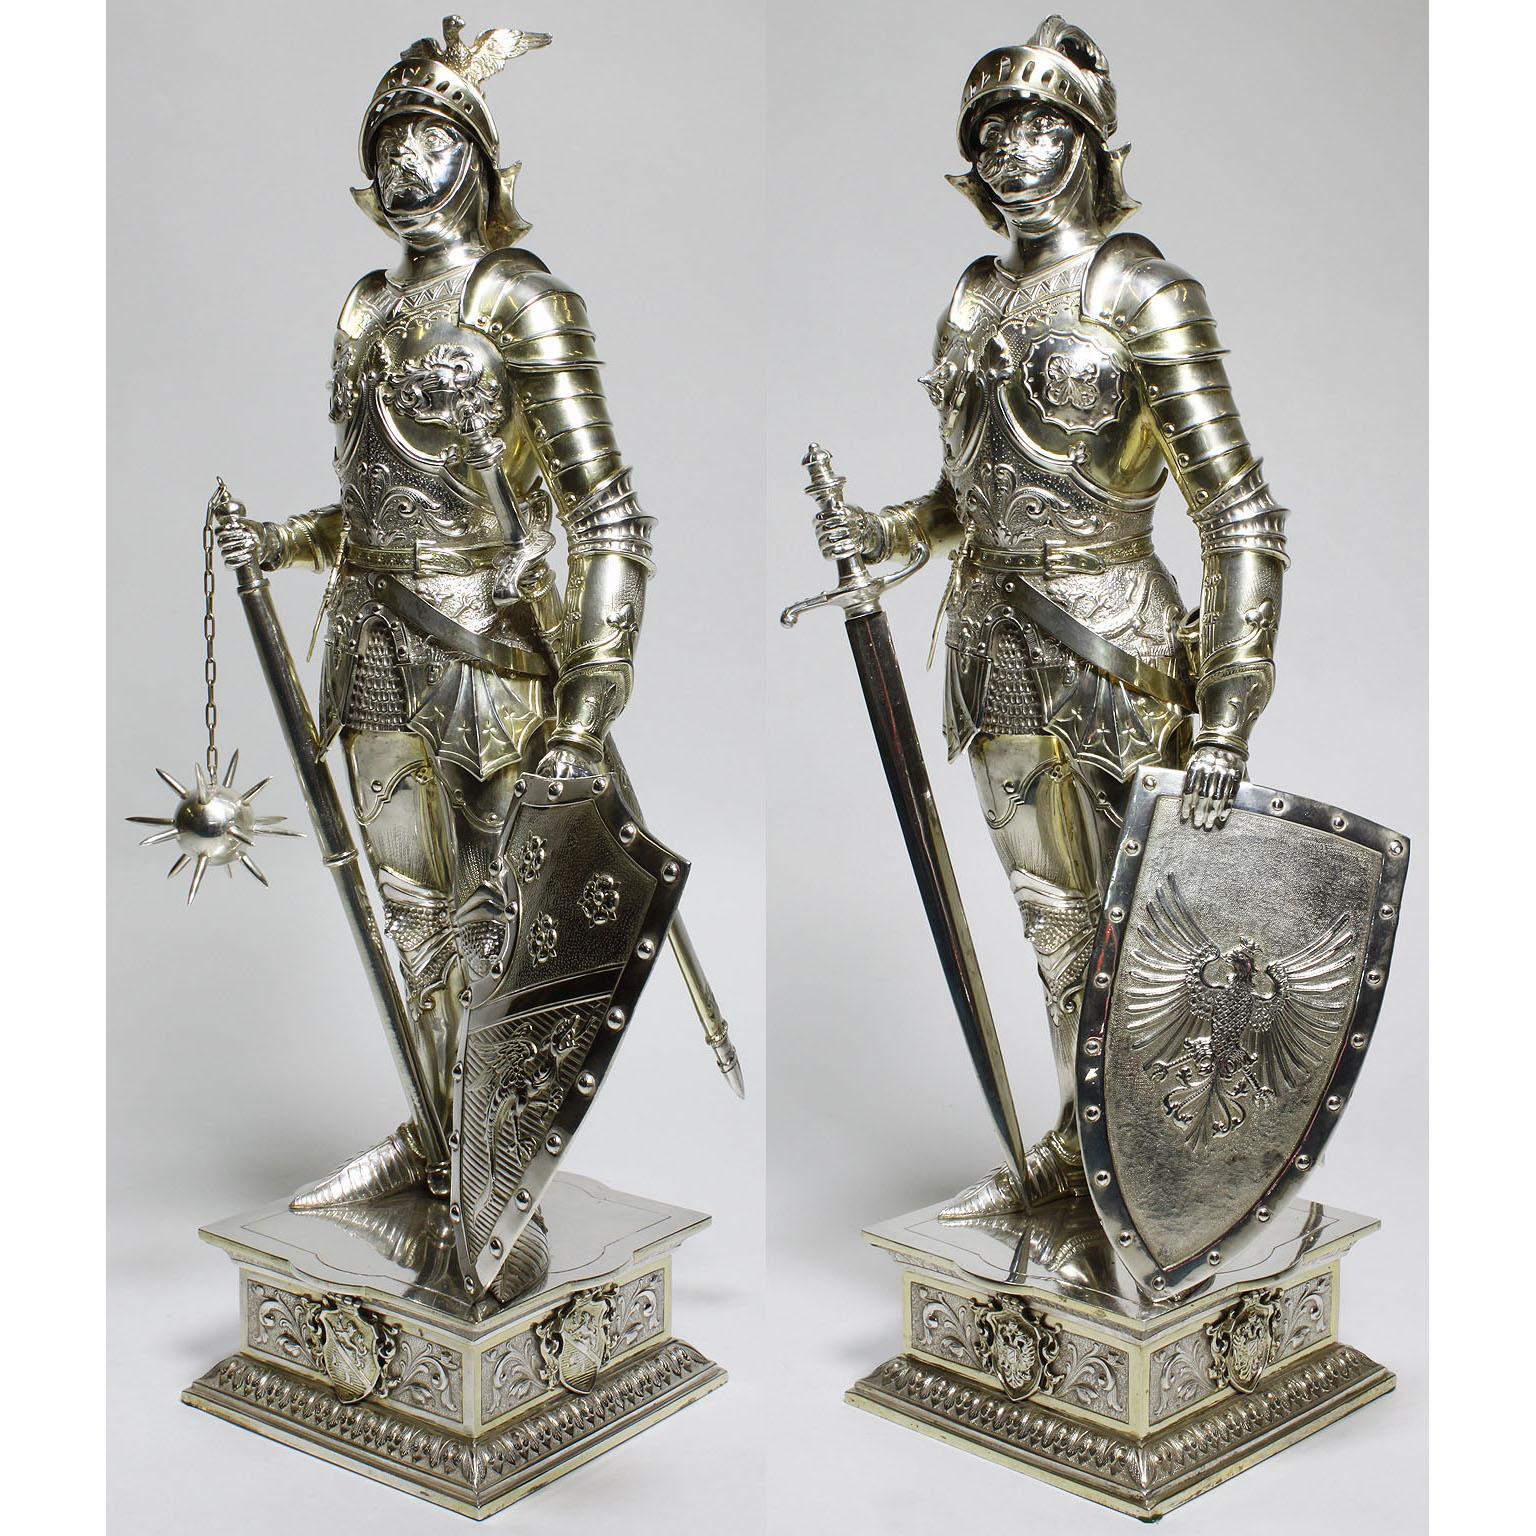 A very fine, large and rare pair of German 19th century silver and vermeil silver standing models of medieval knights in full armour, applied to each side with a shield engraved with a coat-of-armour and movable visors, one knight sporting a